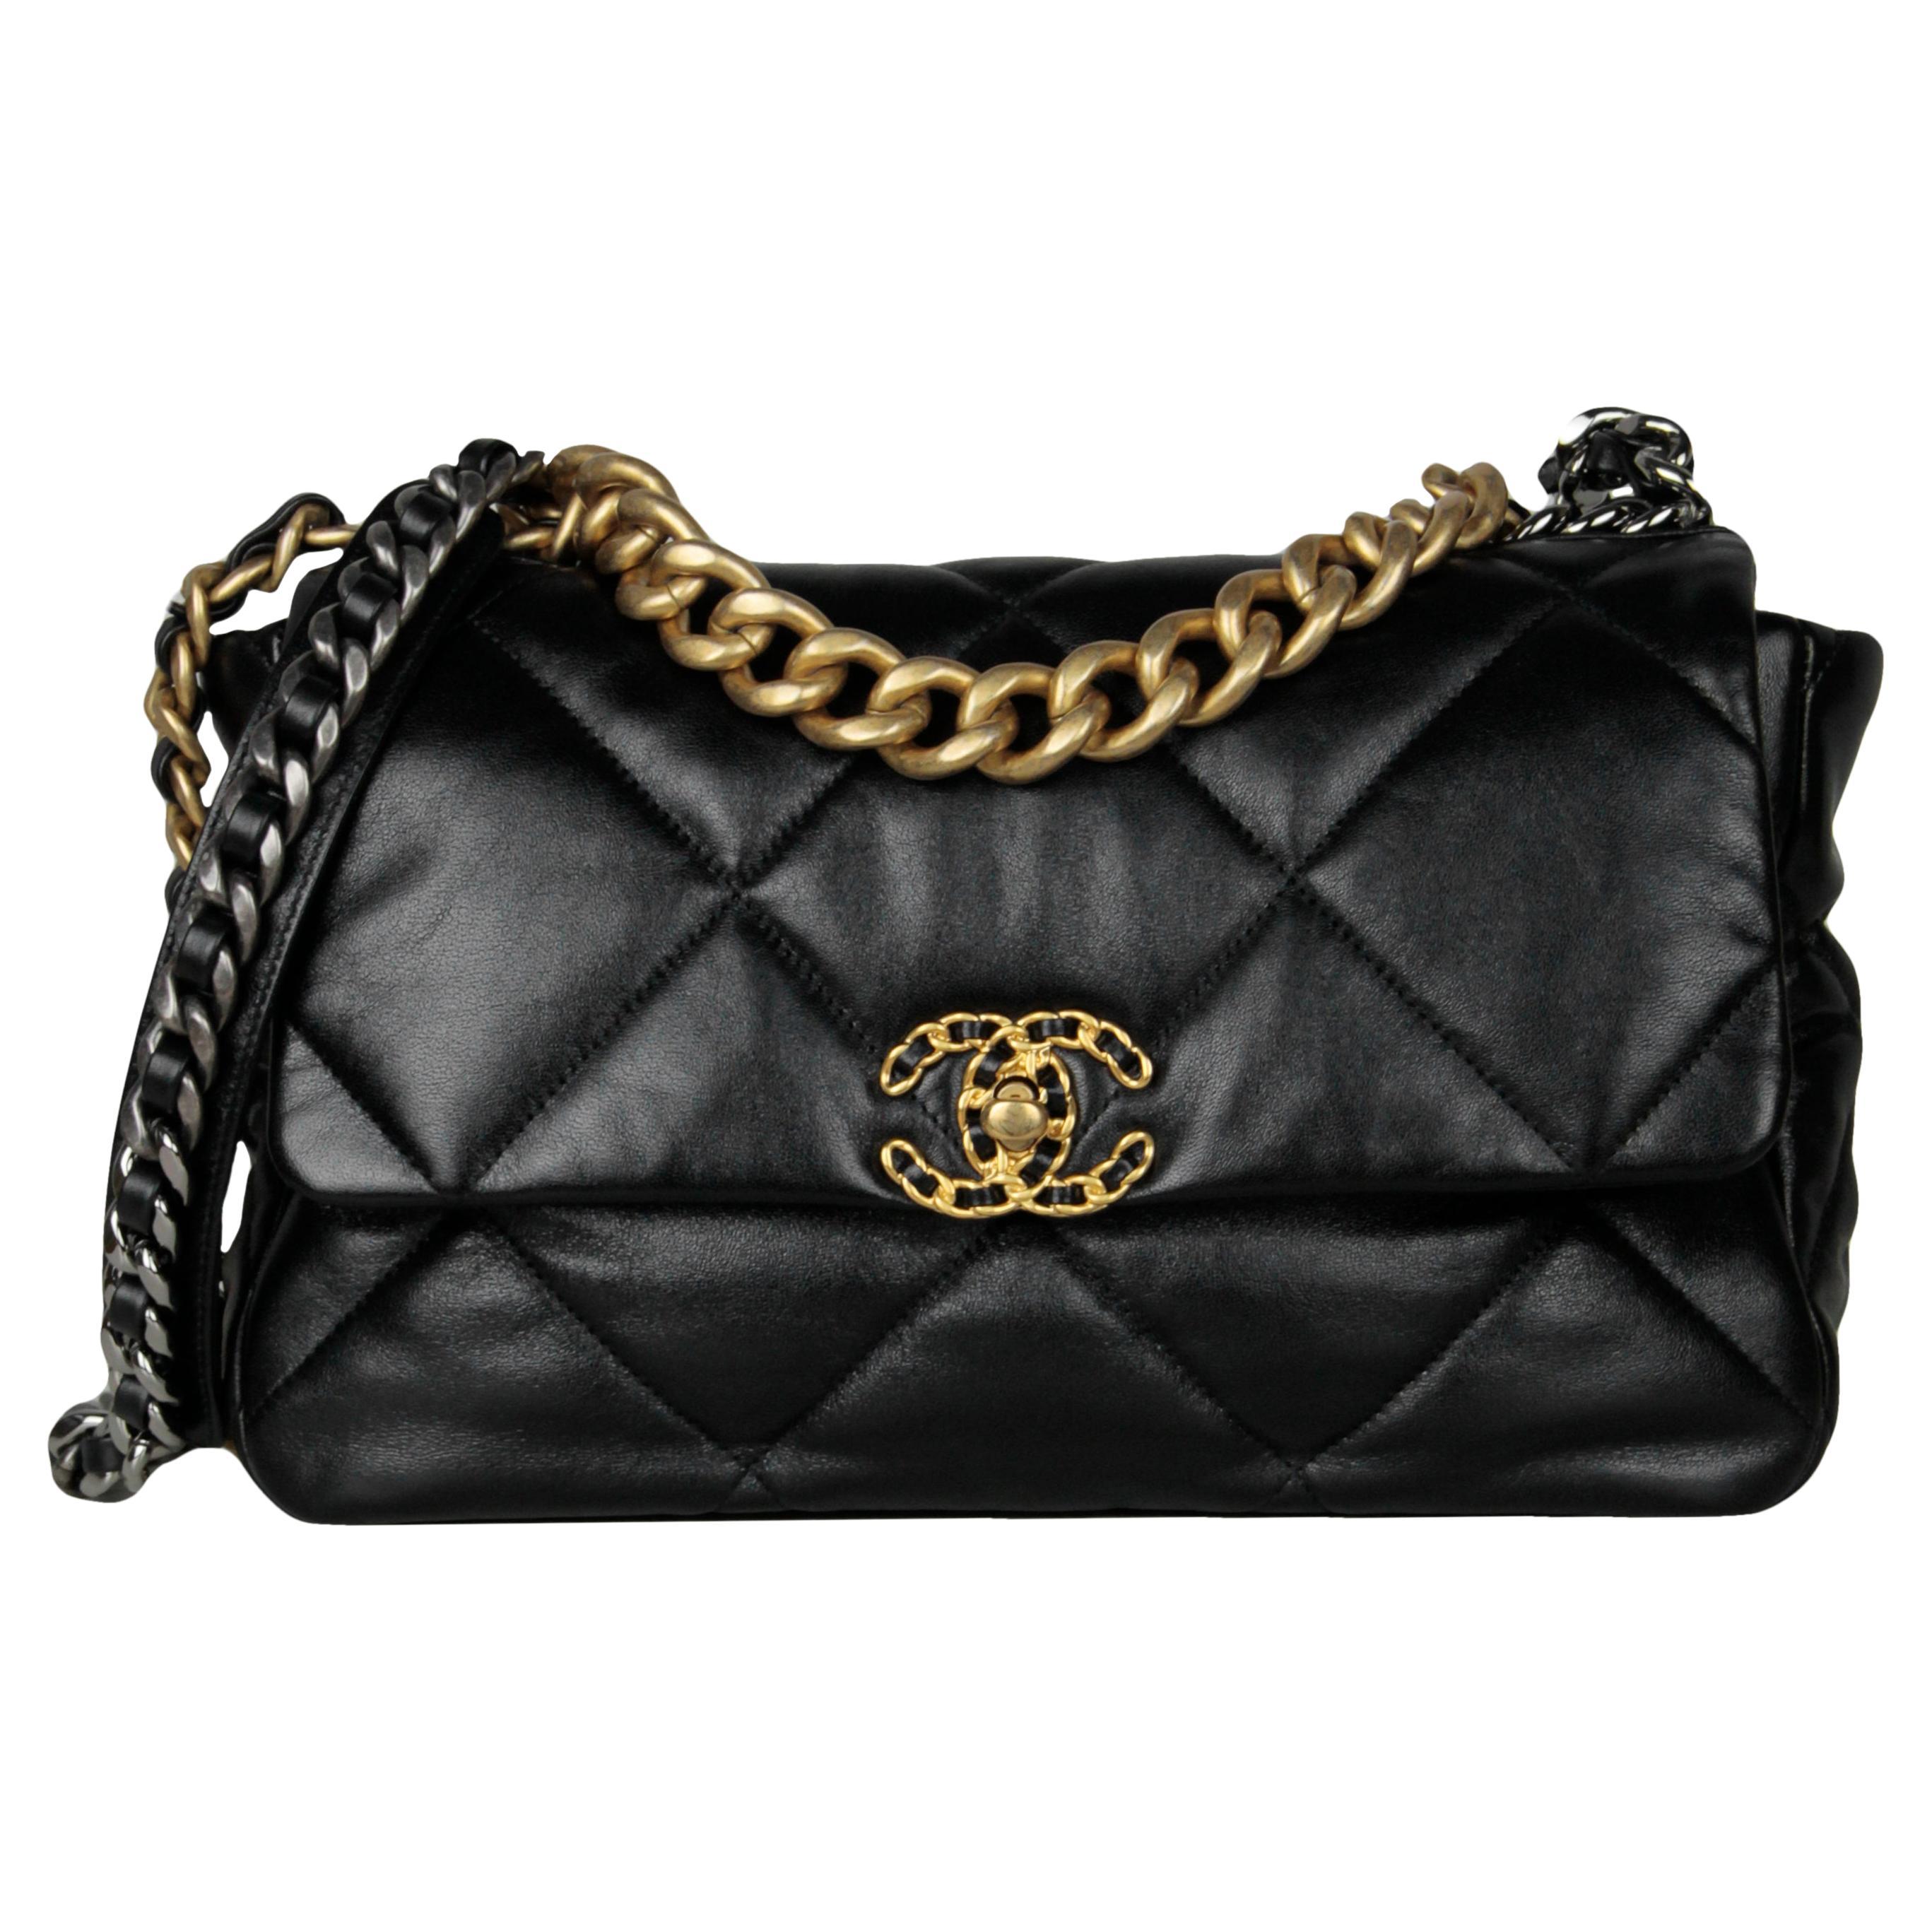 Chanel Large Quilted Lambskin Leather Flap Bag